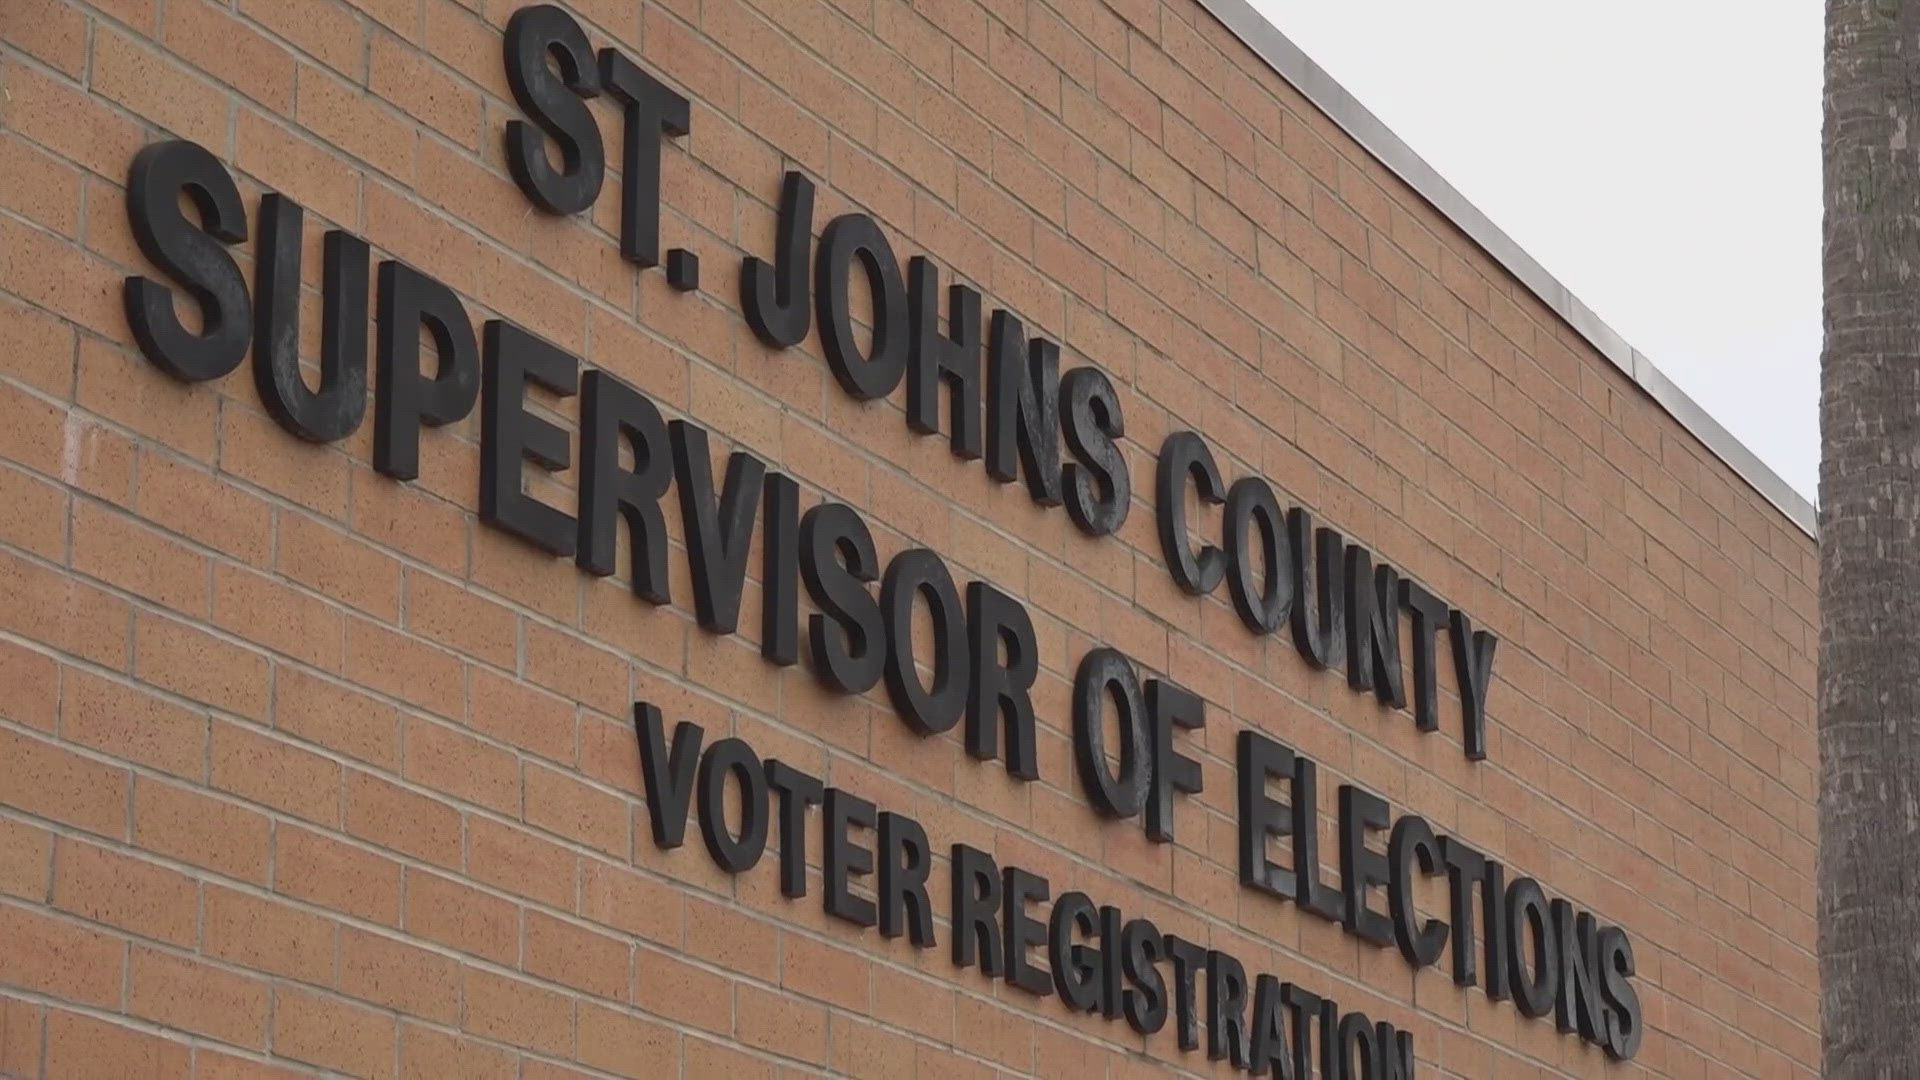 The primary election could determine the county commission and the sheriff's race.